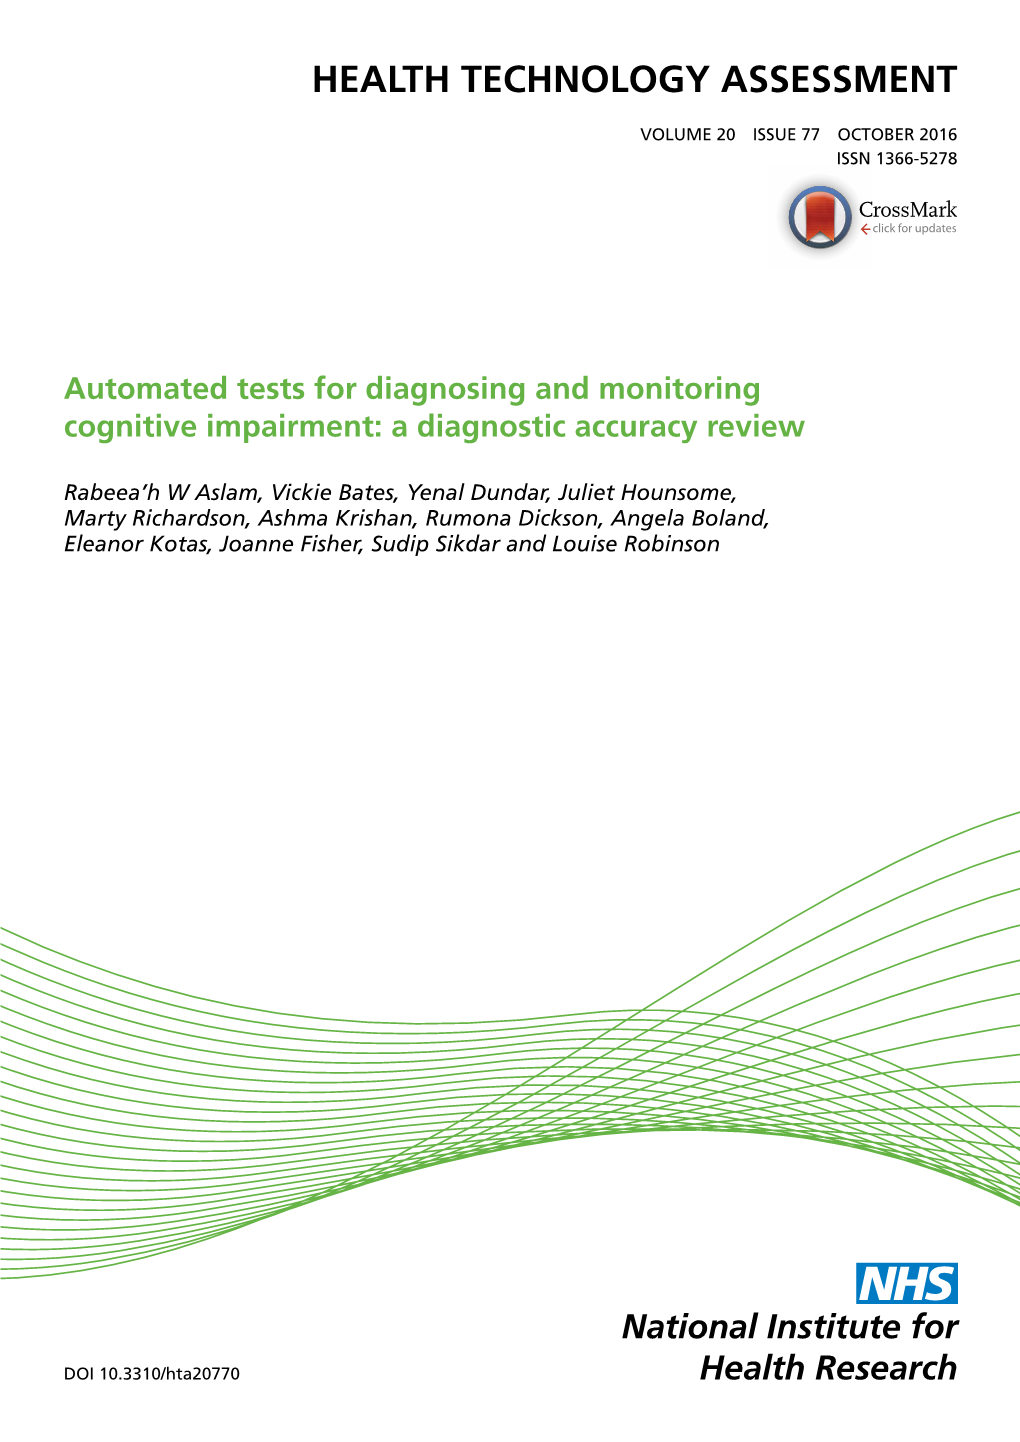 Automated Tests for Diagnosing and Monitoring Cognitive Impairment: a Diagnostic Accuracy Review